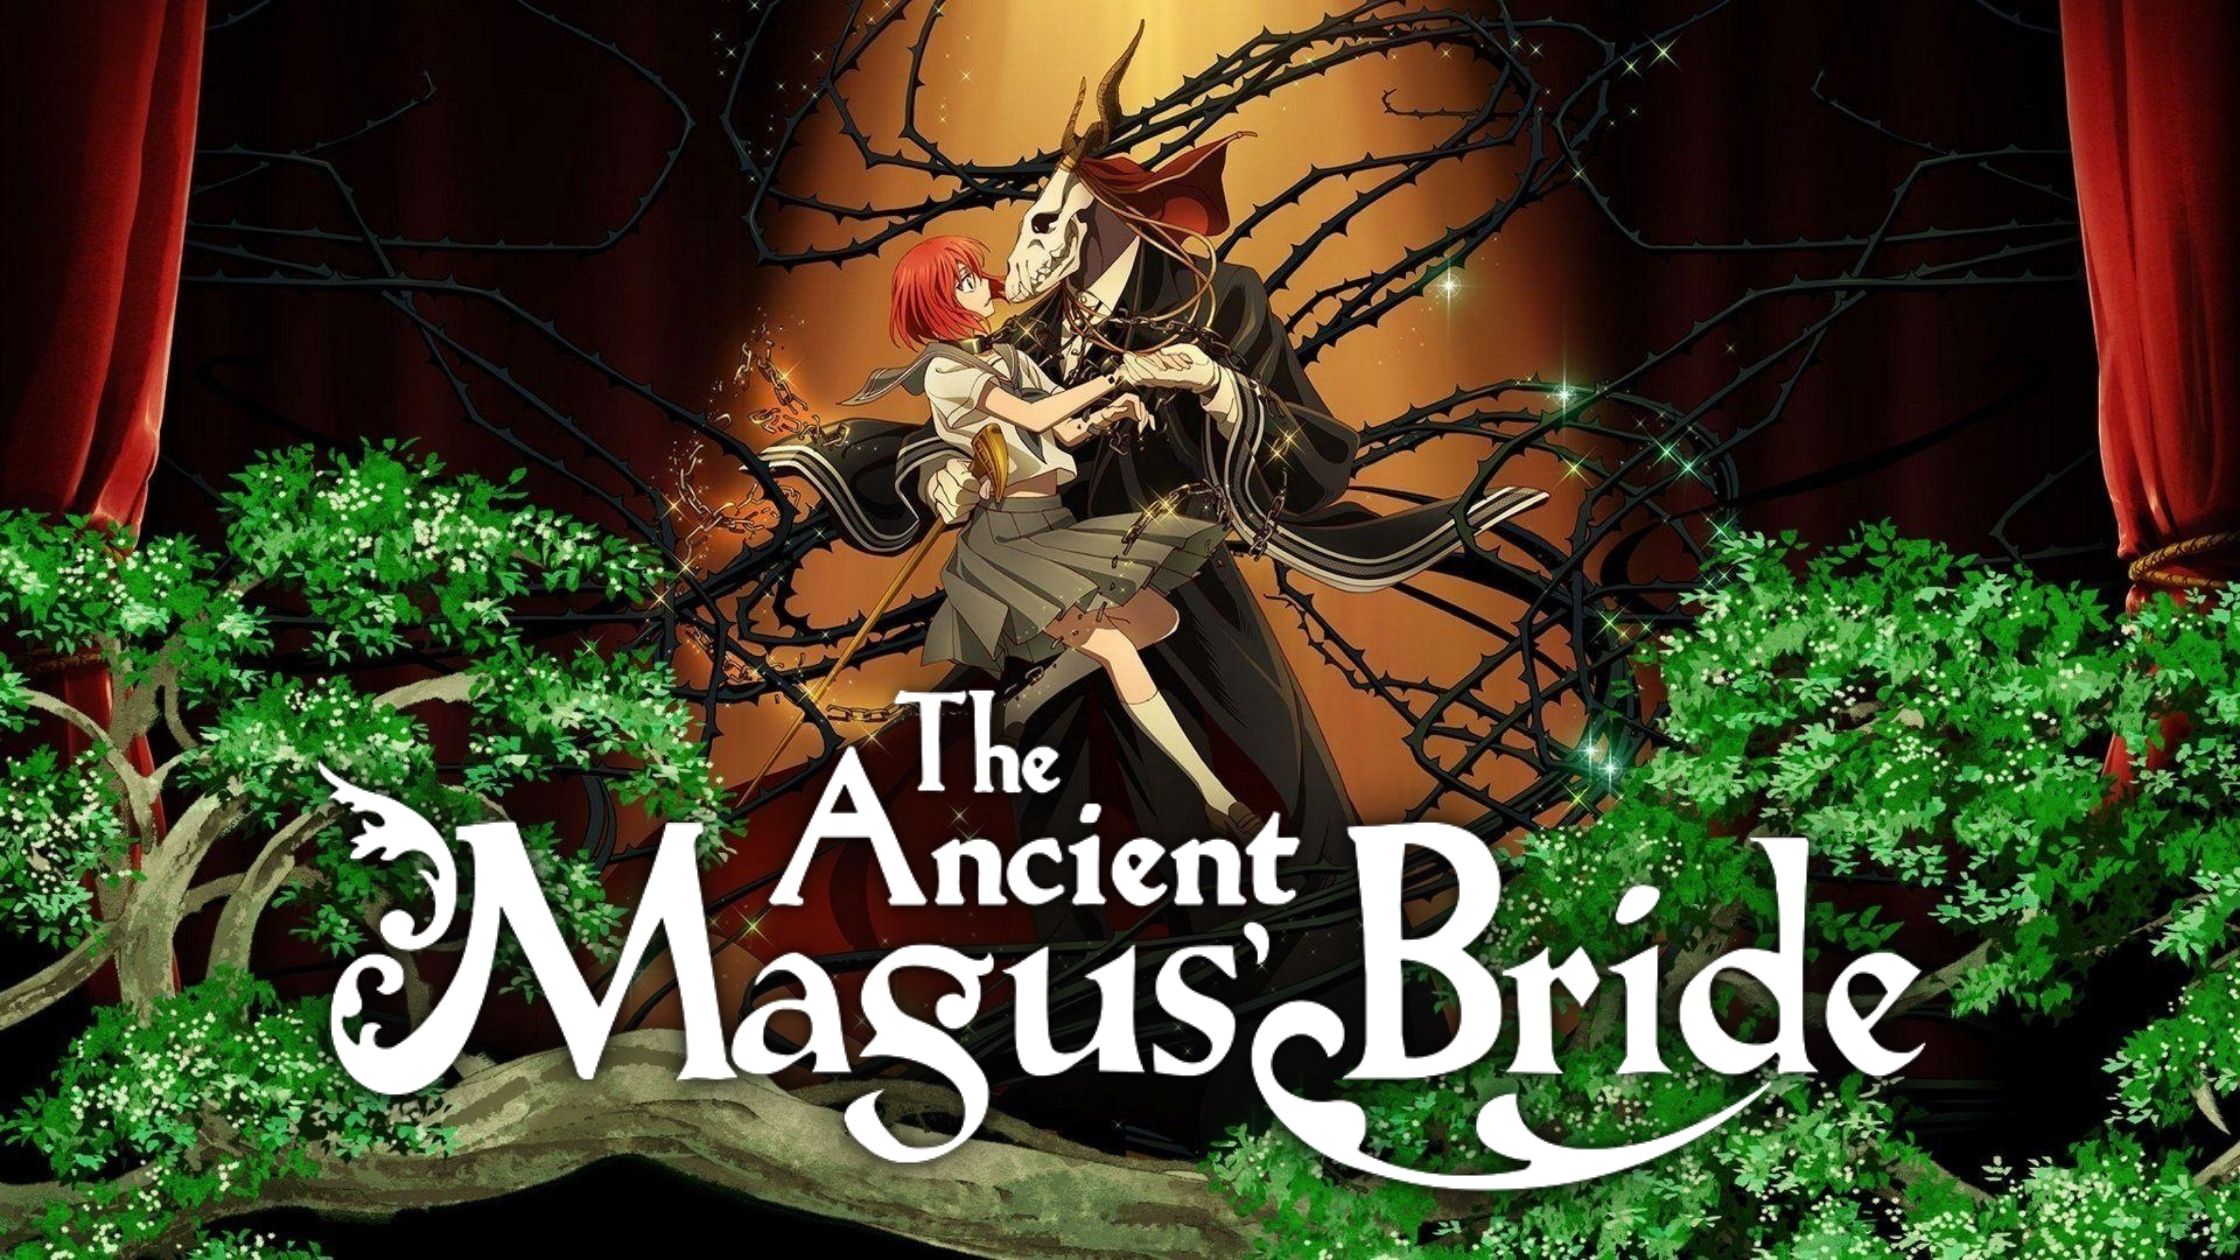 More Episodes of The Ancient Magus Bride May Be On The Way  The Nerd Stash